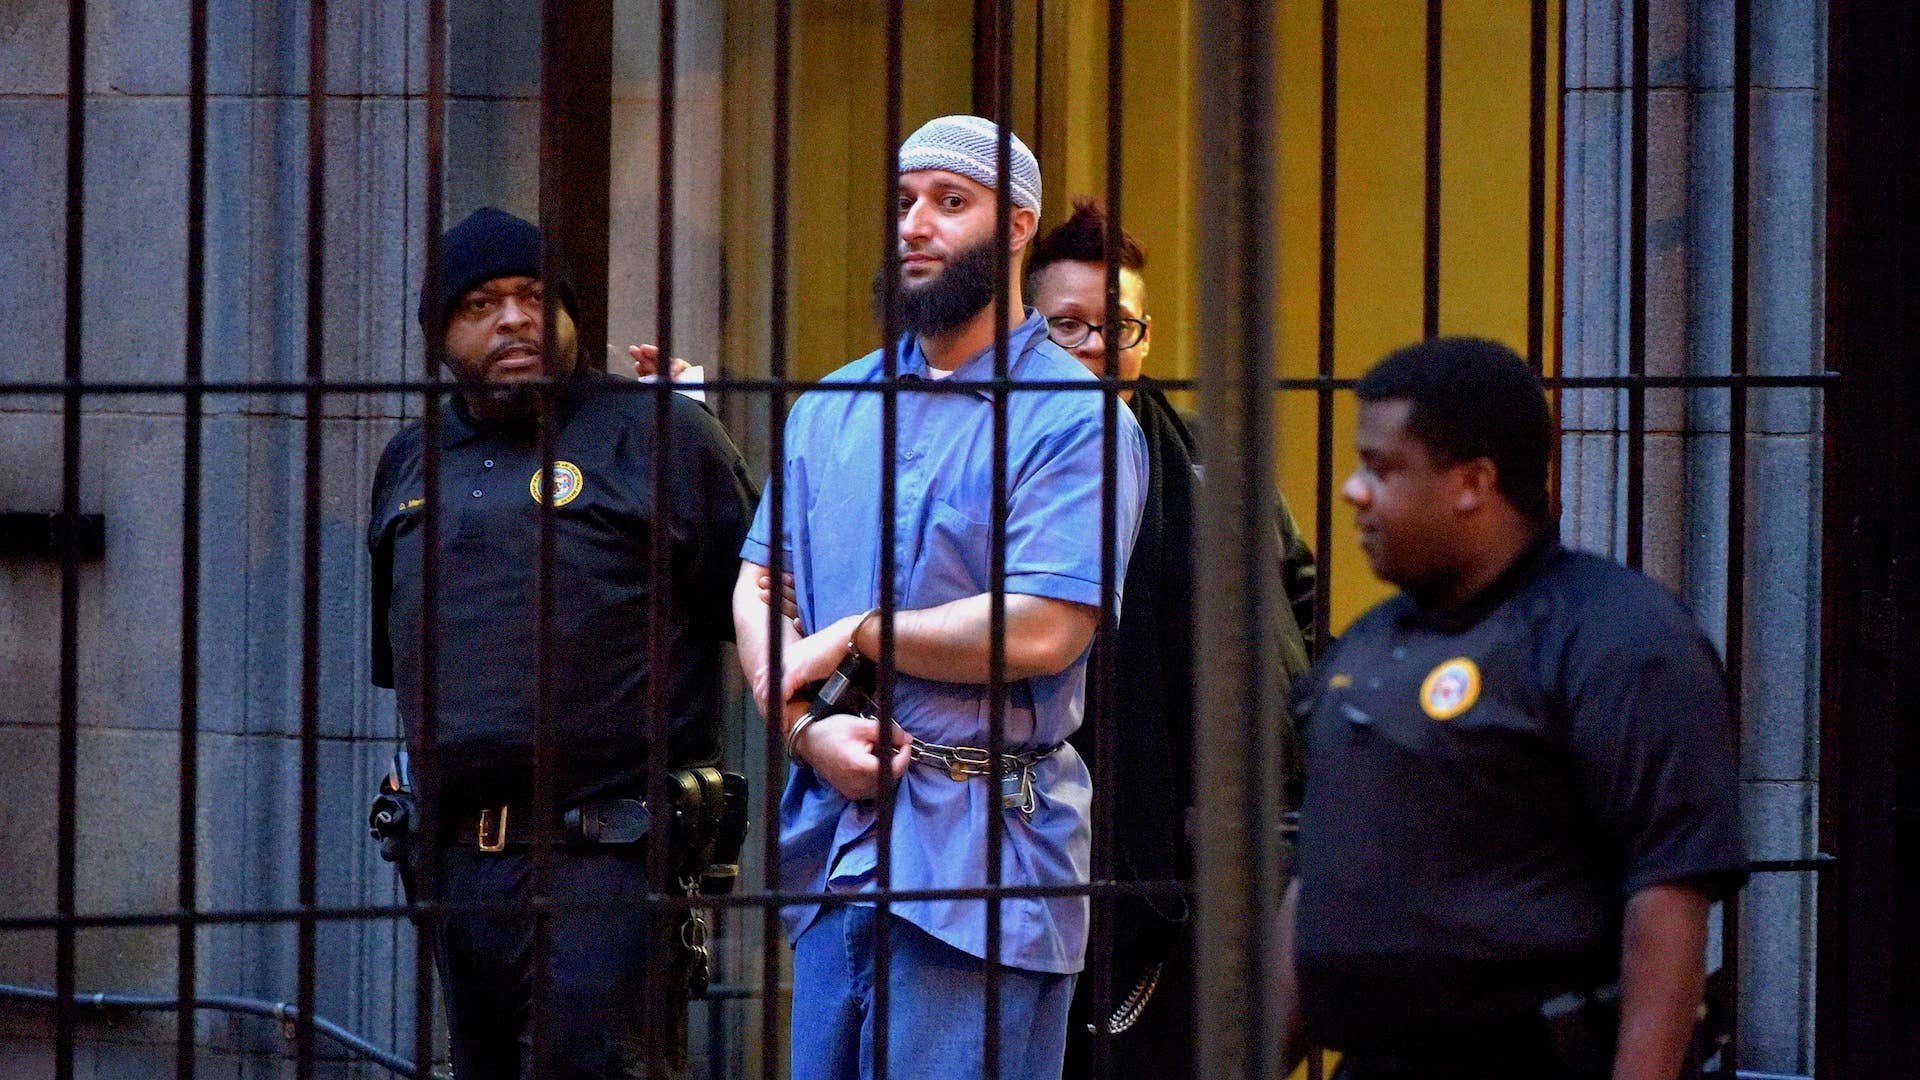 Officials escort "Serial" podcast subject Adnan Syed from the courthouse